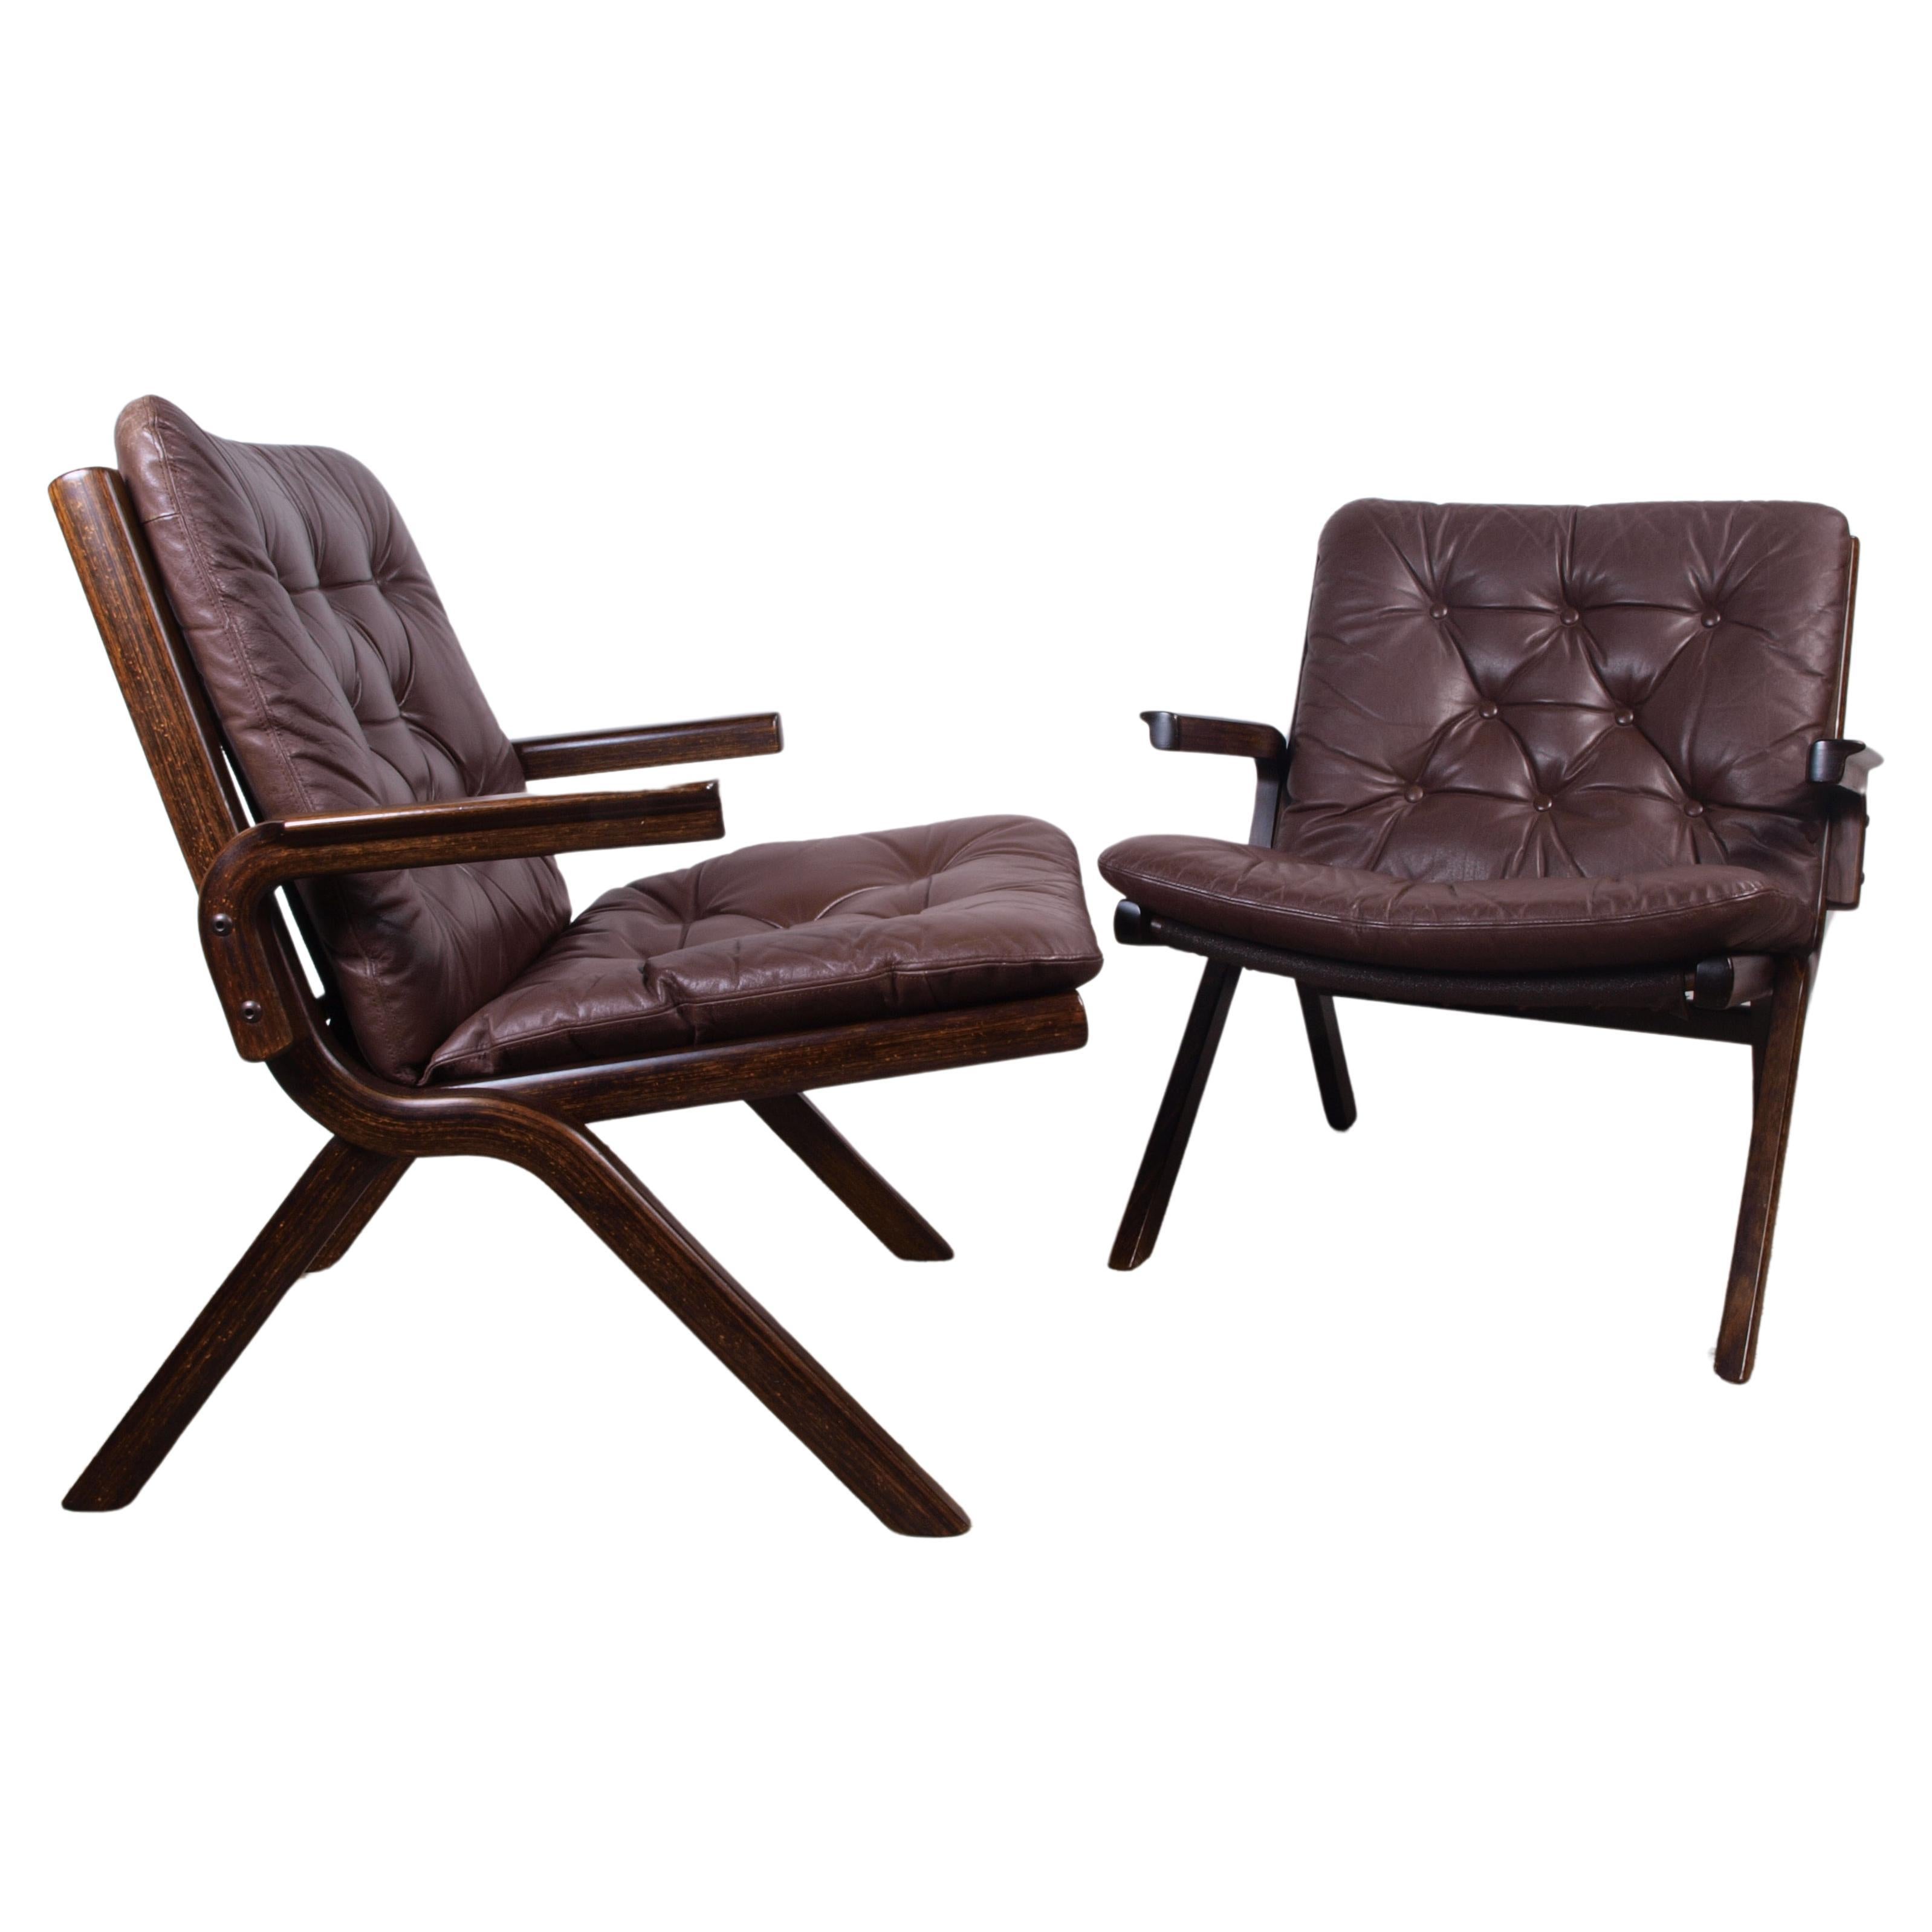 Ekornes Norway, Leather folding chair 1960s